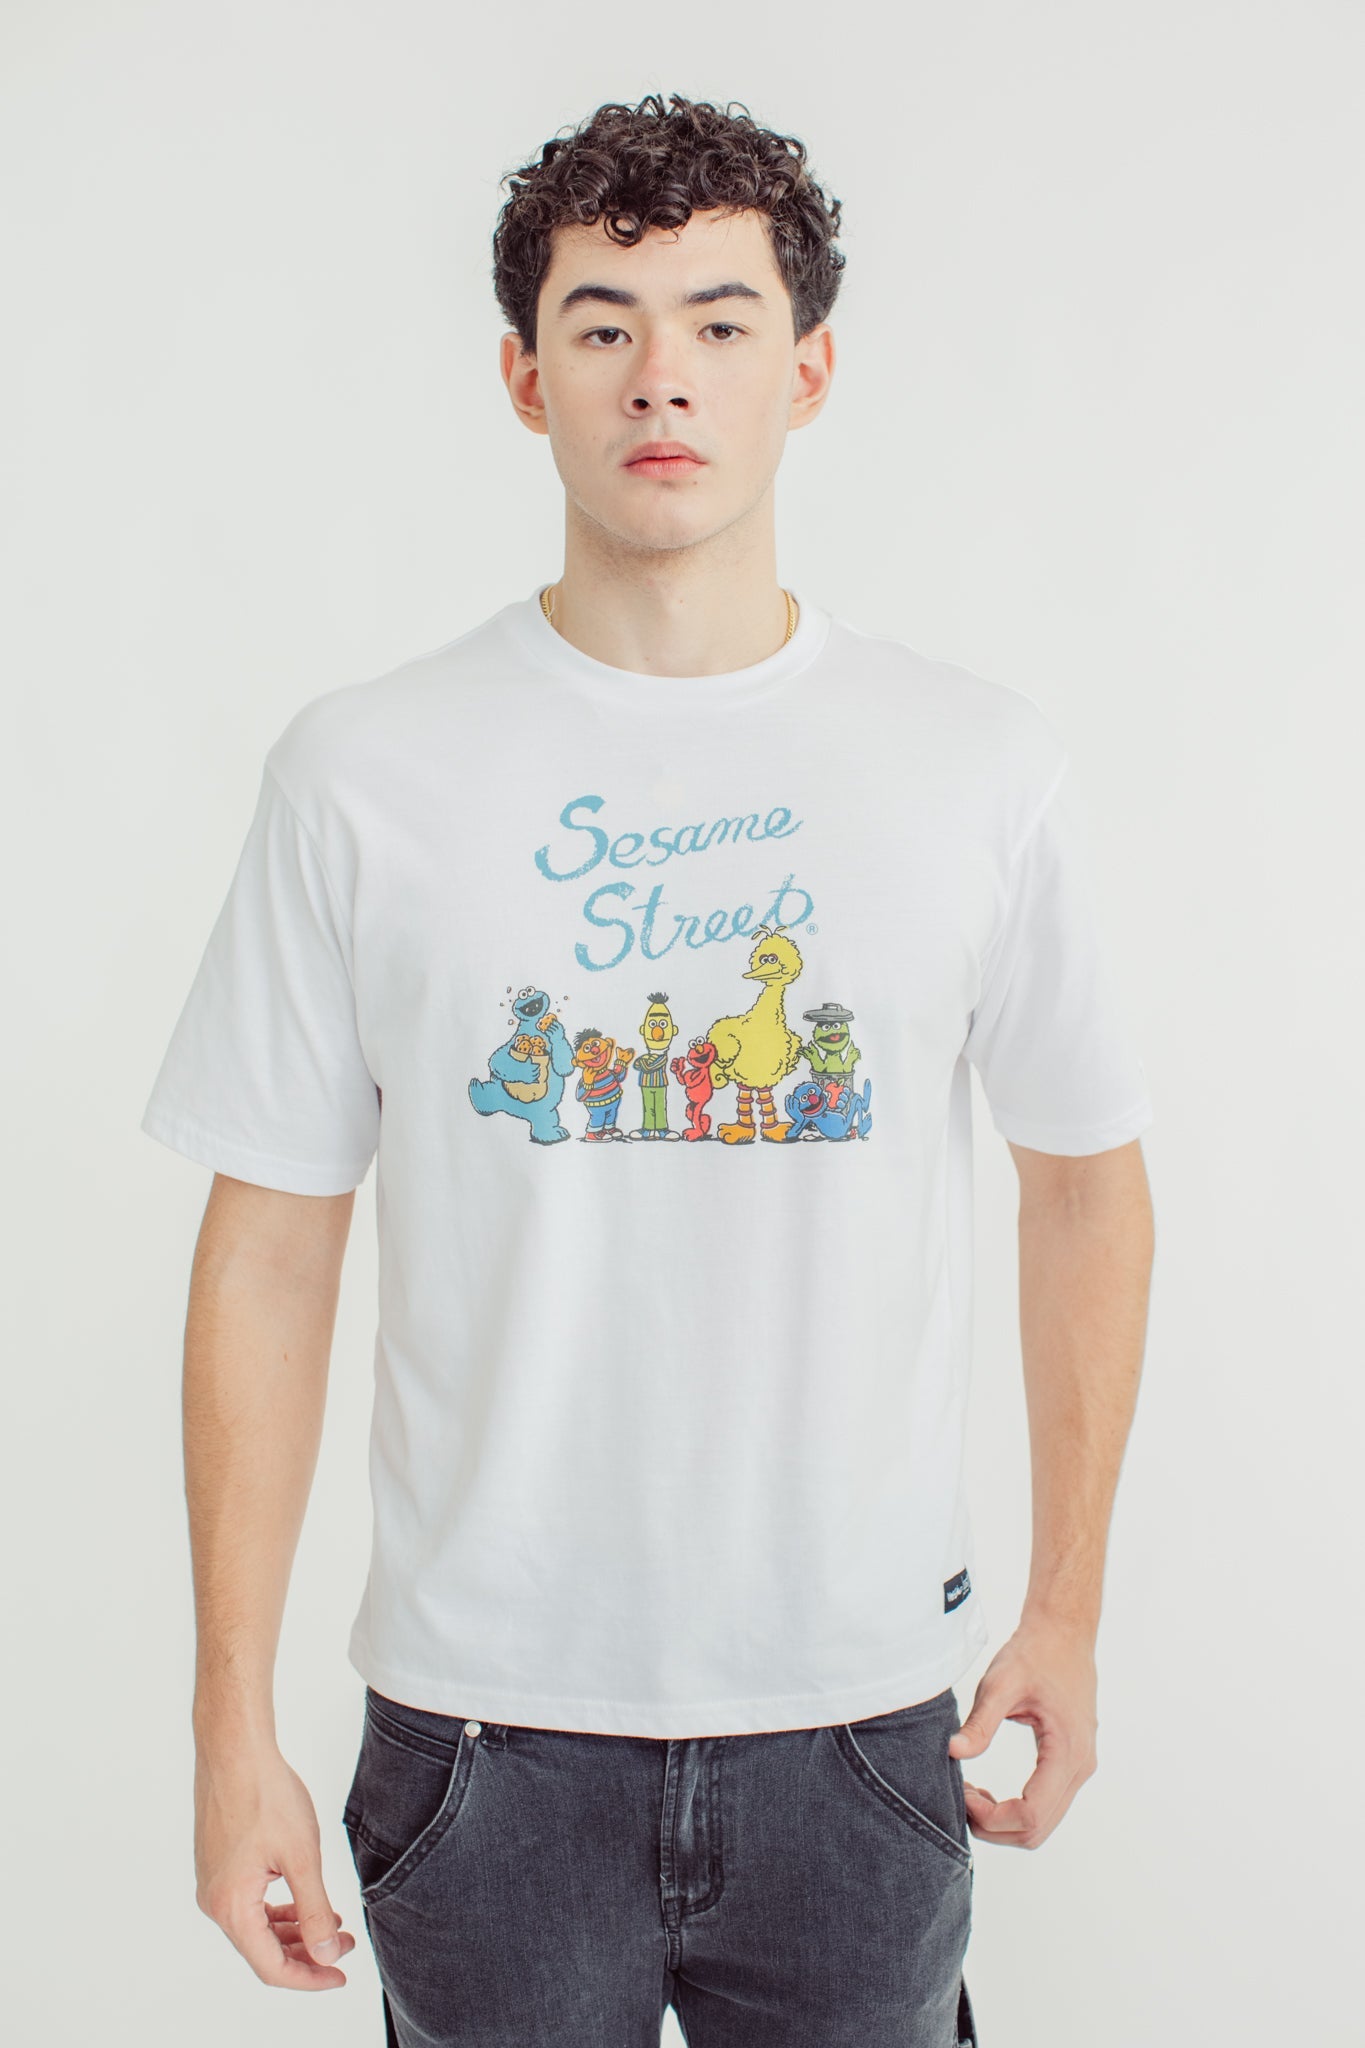 White Unisex with Group Design Oversized Fit Tee - Mossimo PH